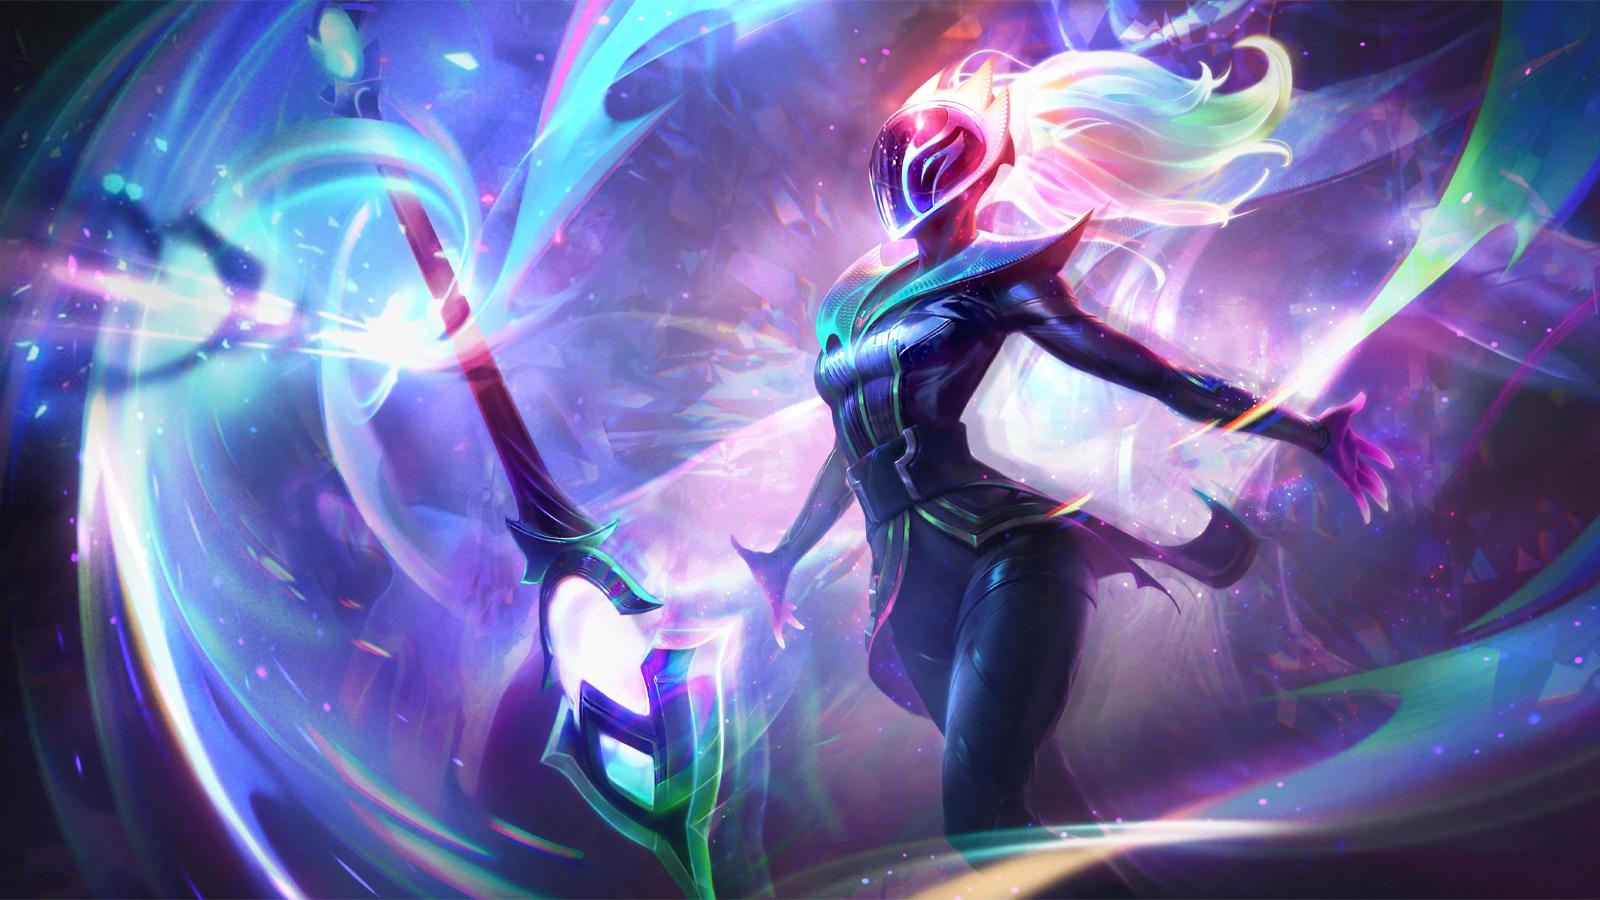 Lil Nas X and K'Sante collab in League of Legends is perfect